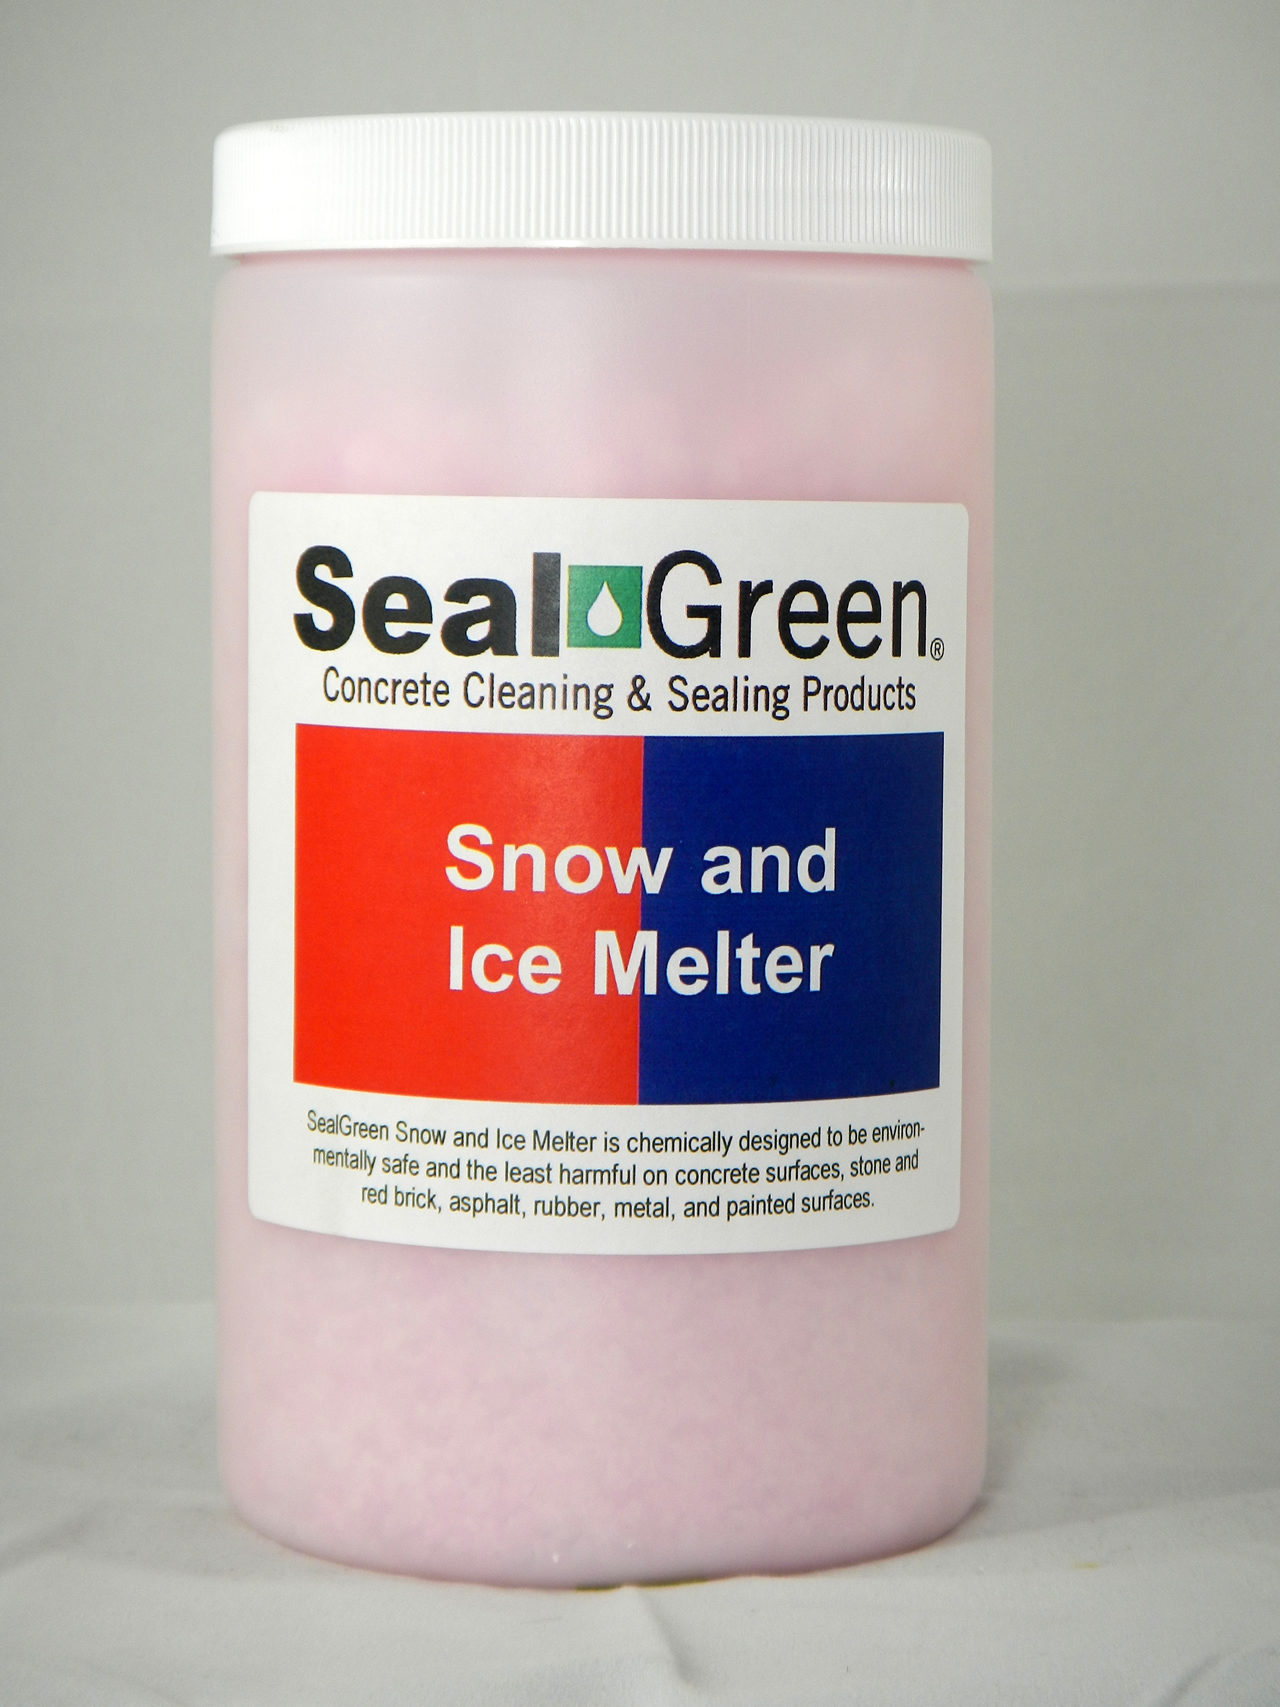 Snow and Ice Melter Emergency Containers Questions & Answers